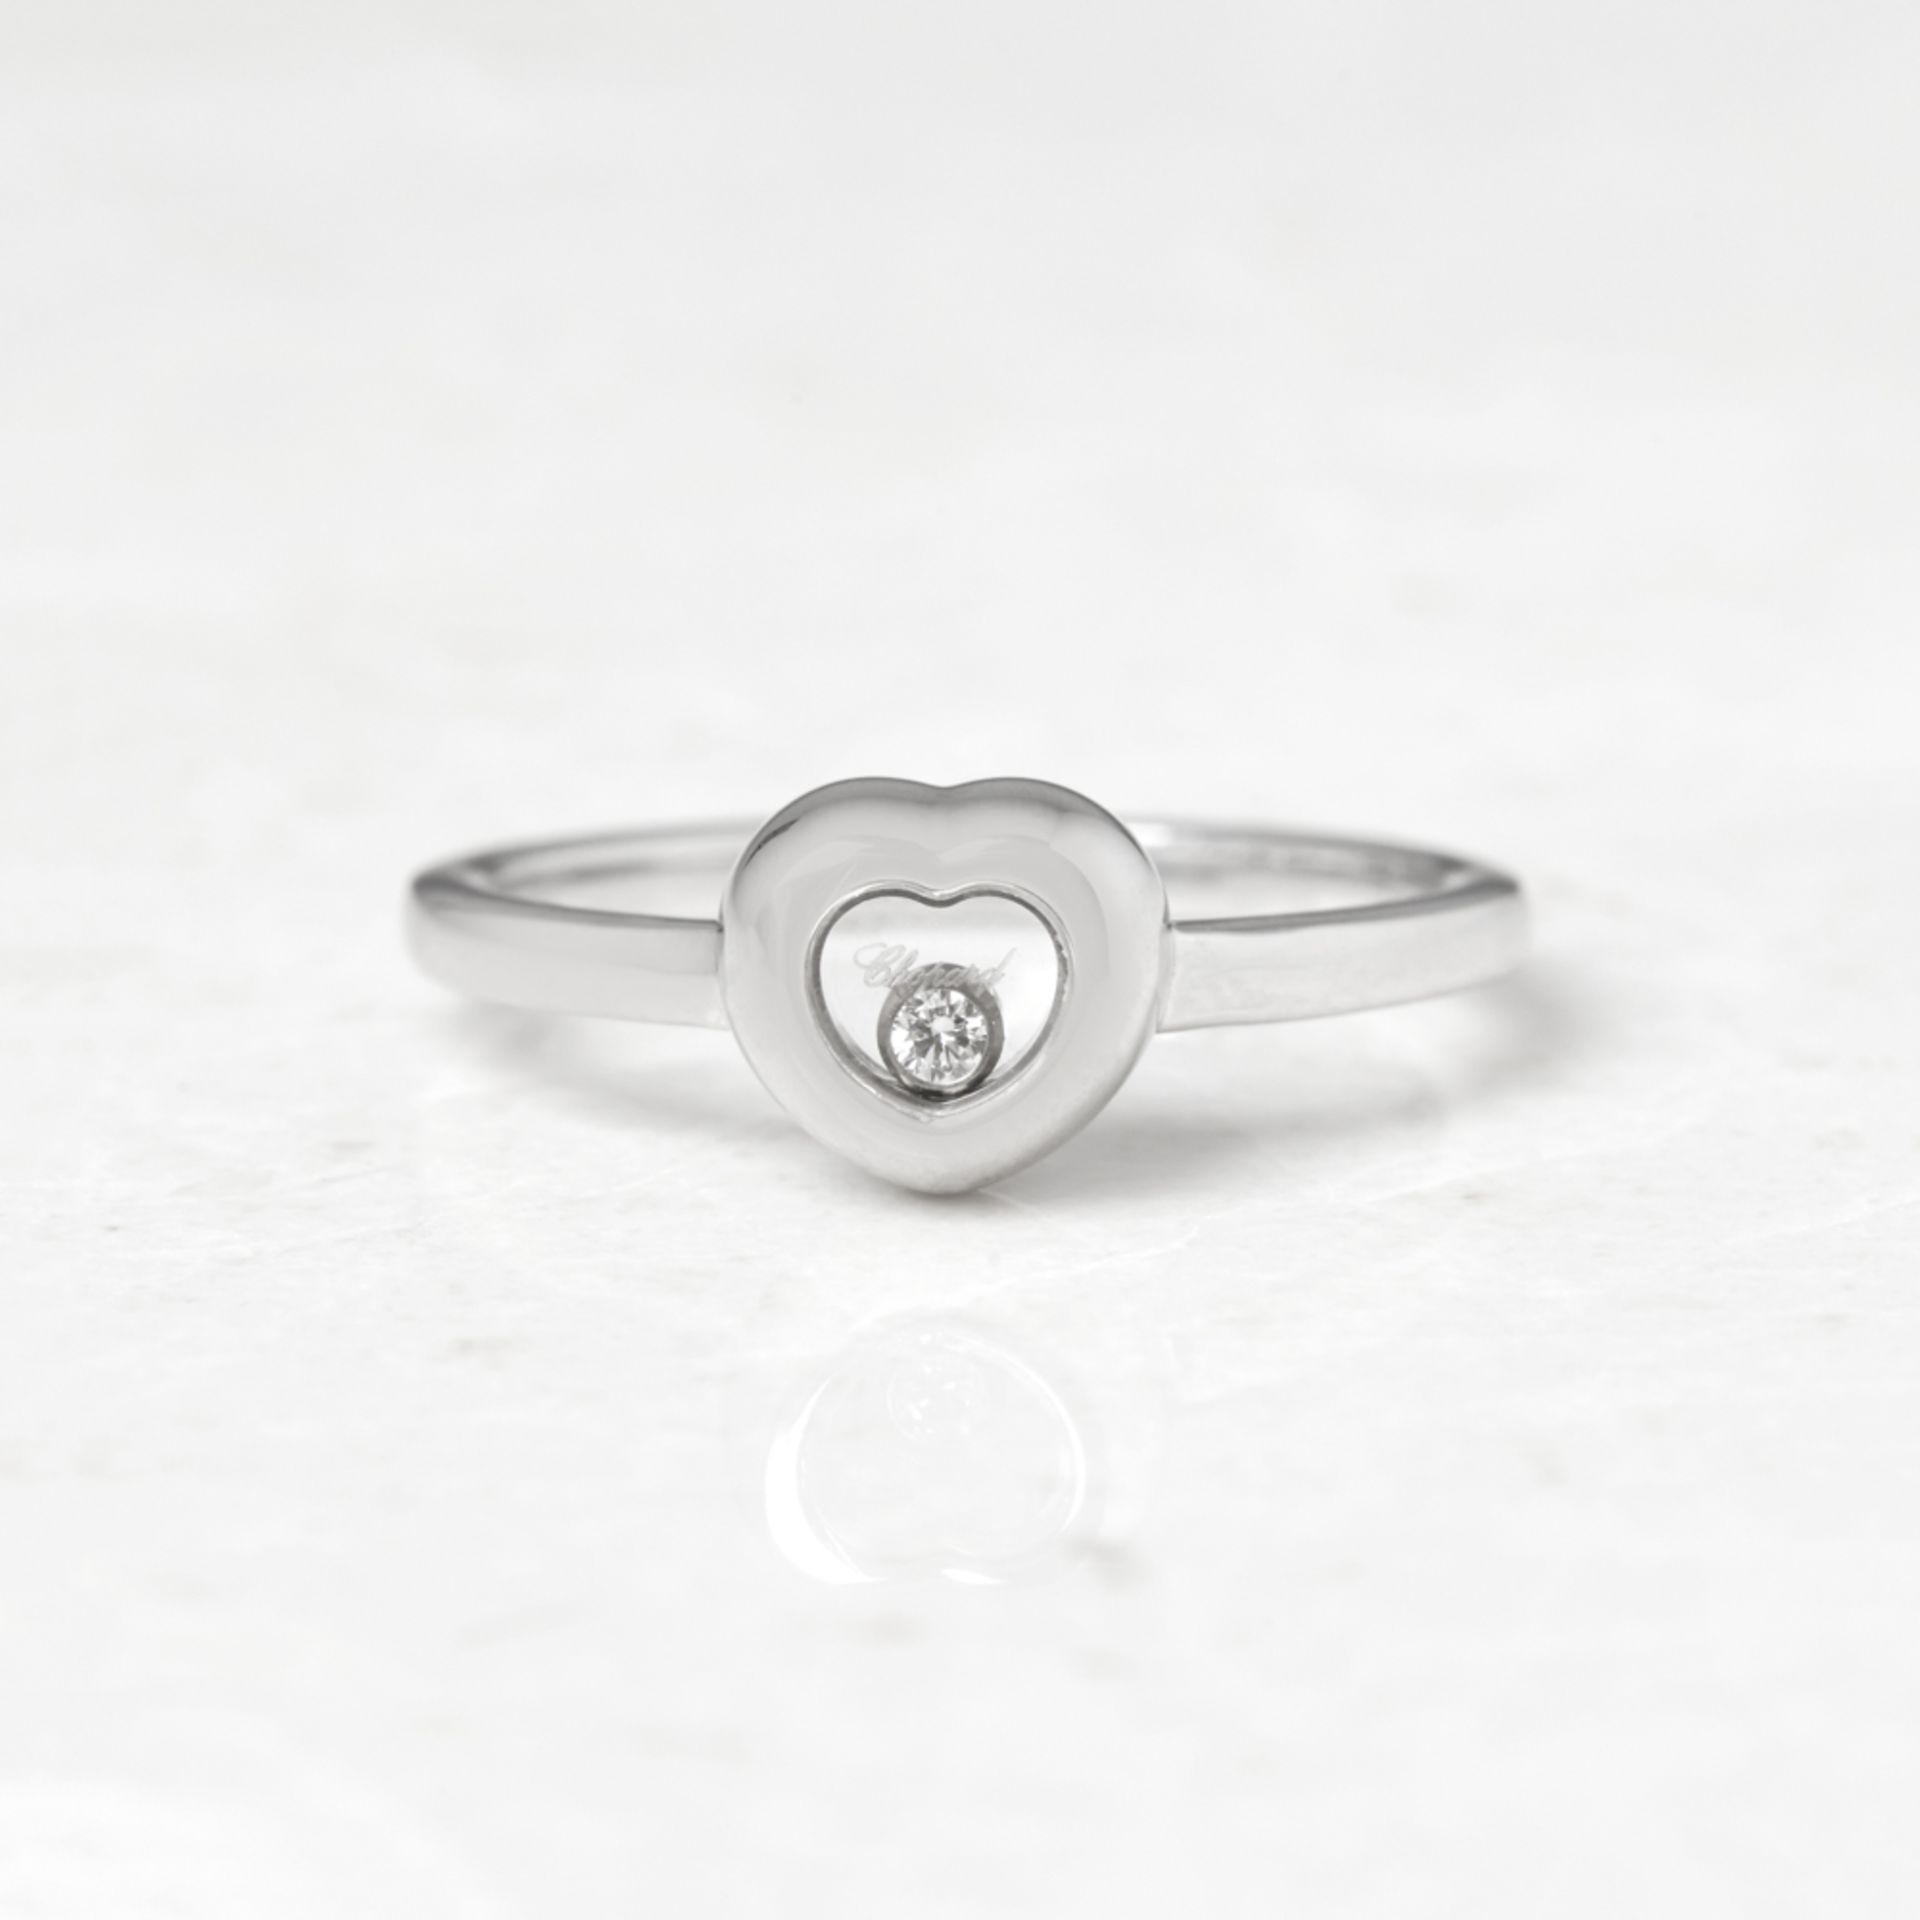 Chopard 18k White Gold Heart Small Happy Diamonds Ring - Image 3 of 8